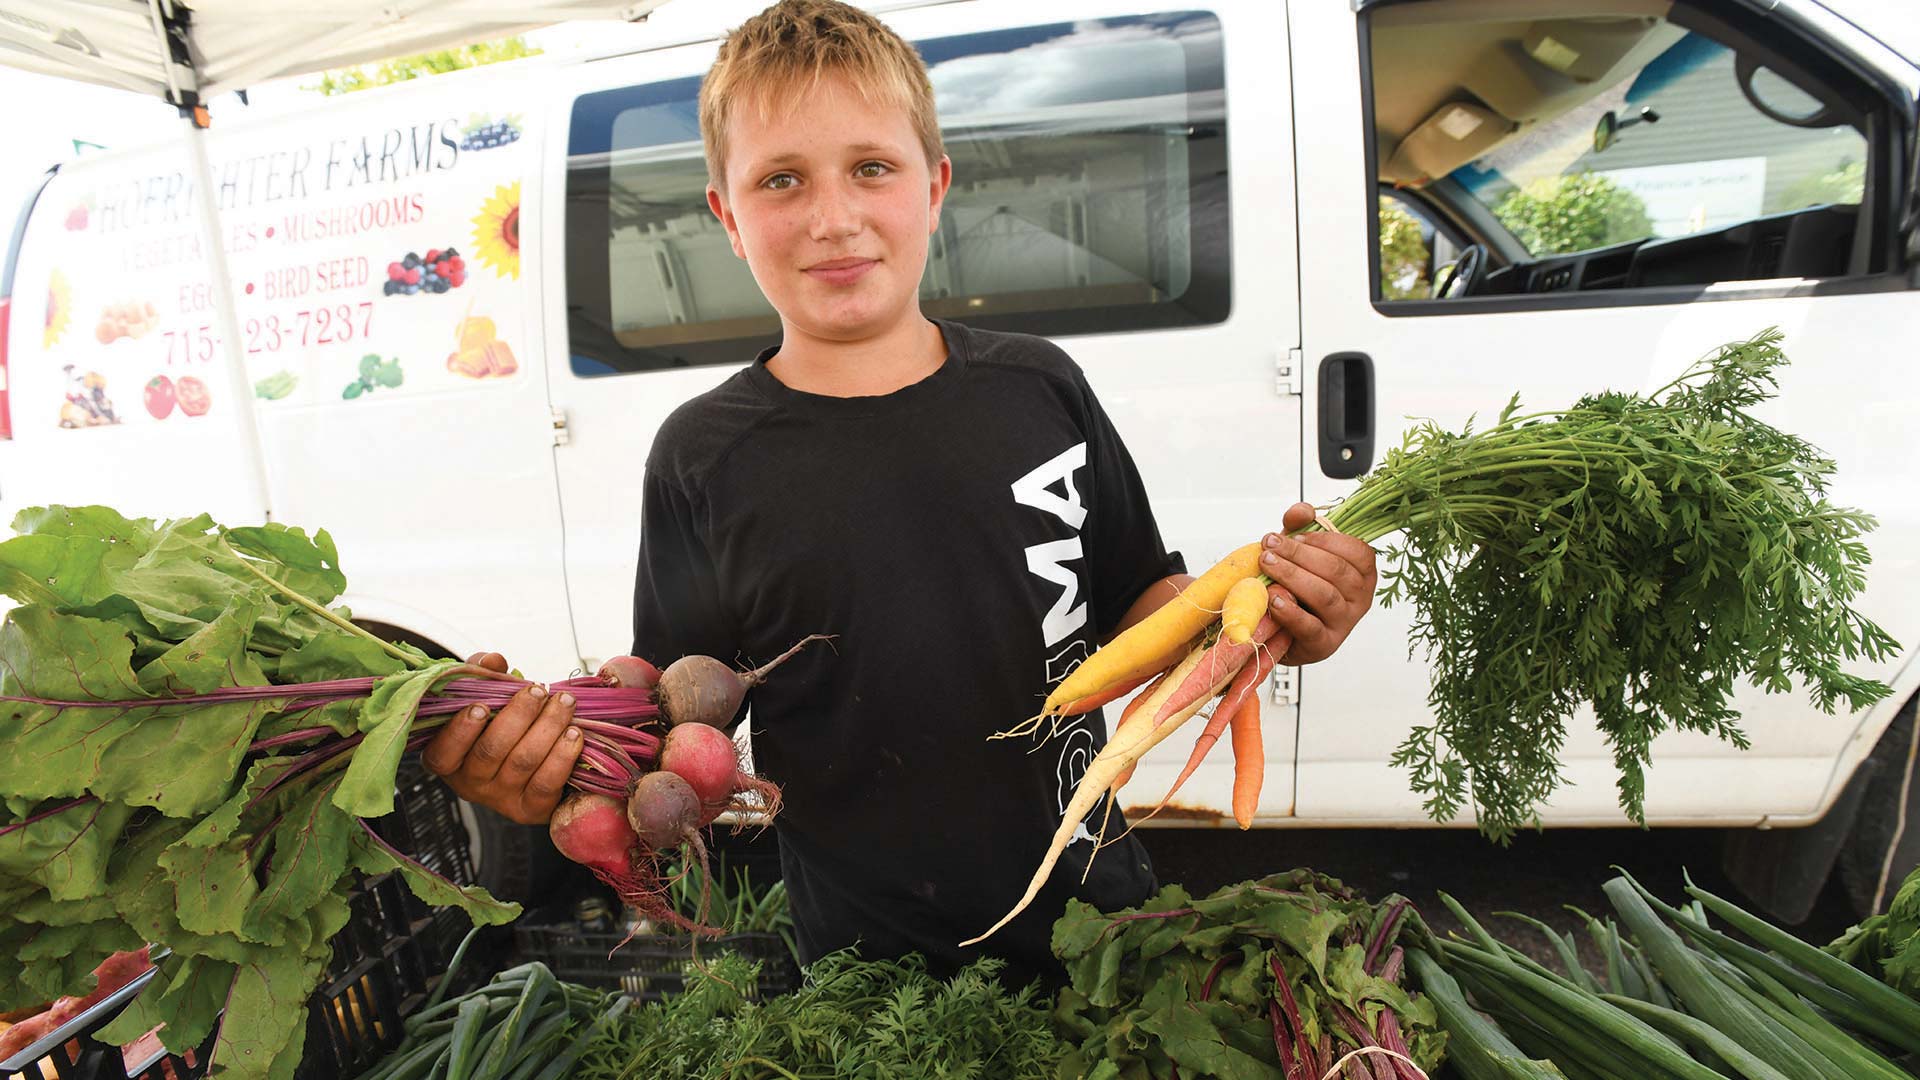 Kid holding up fresh-grown produce at the farmers market